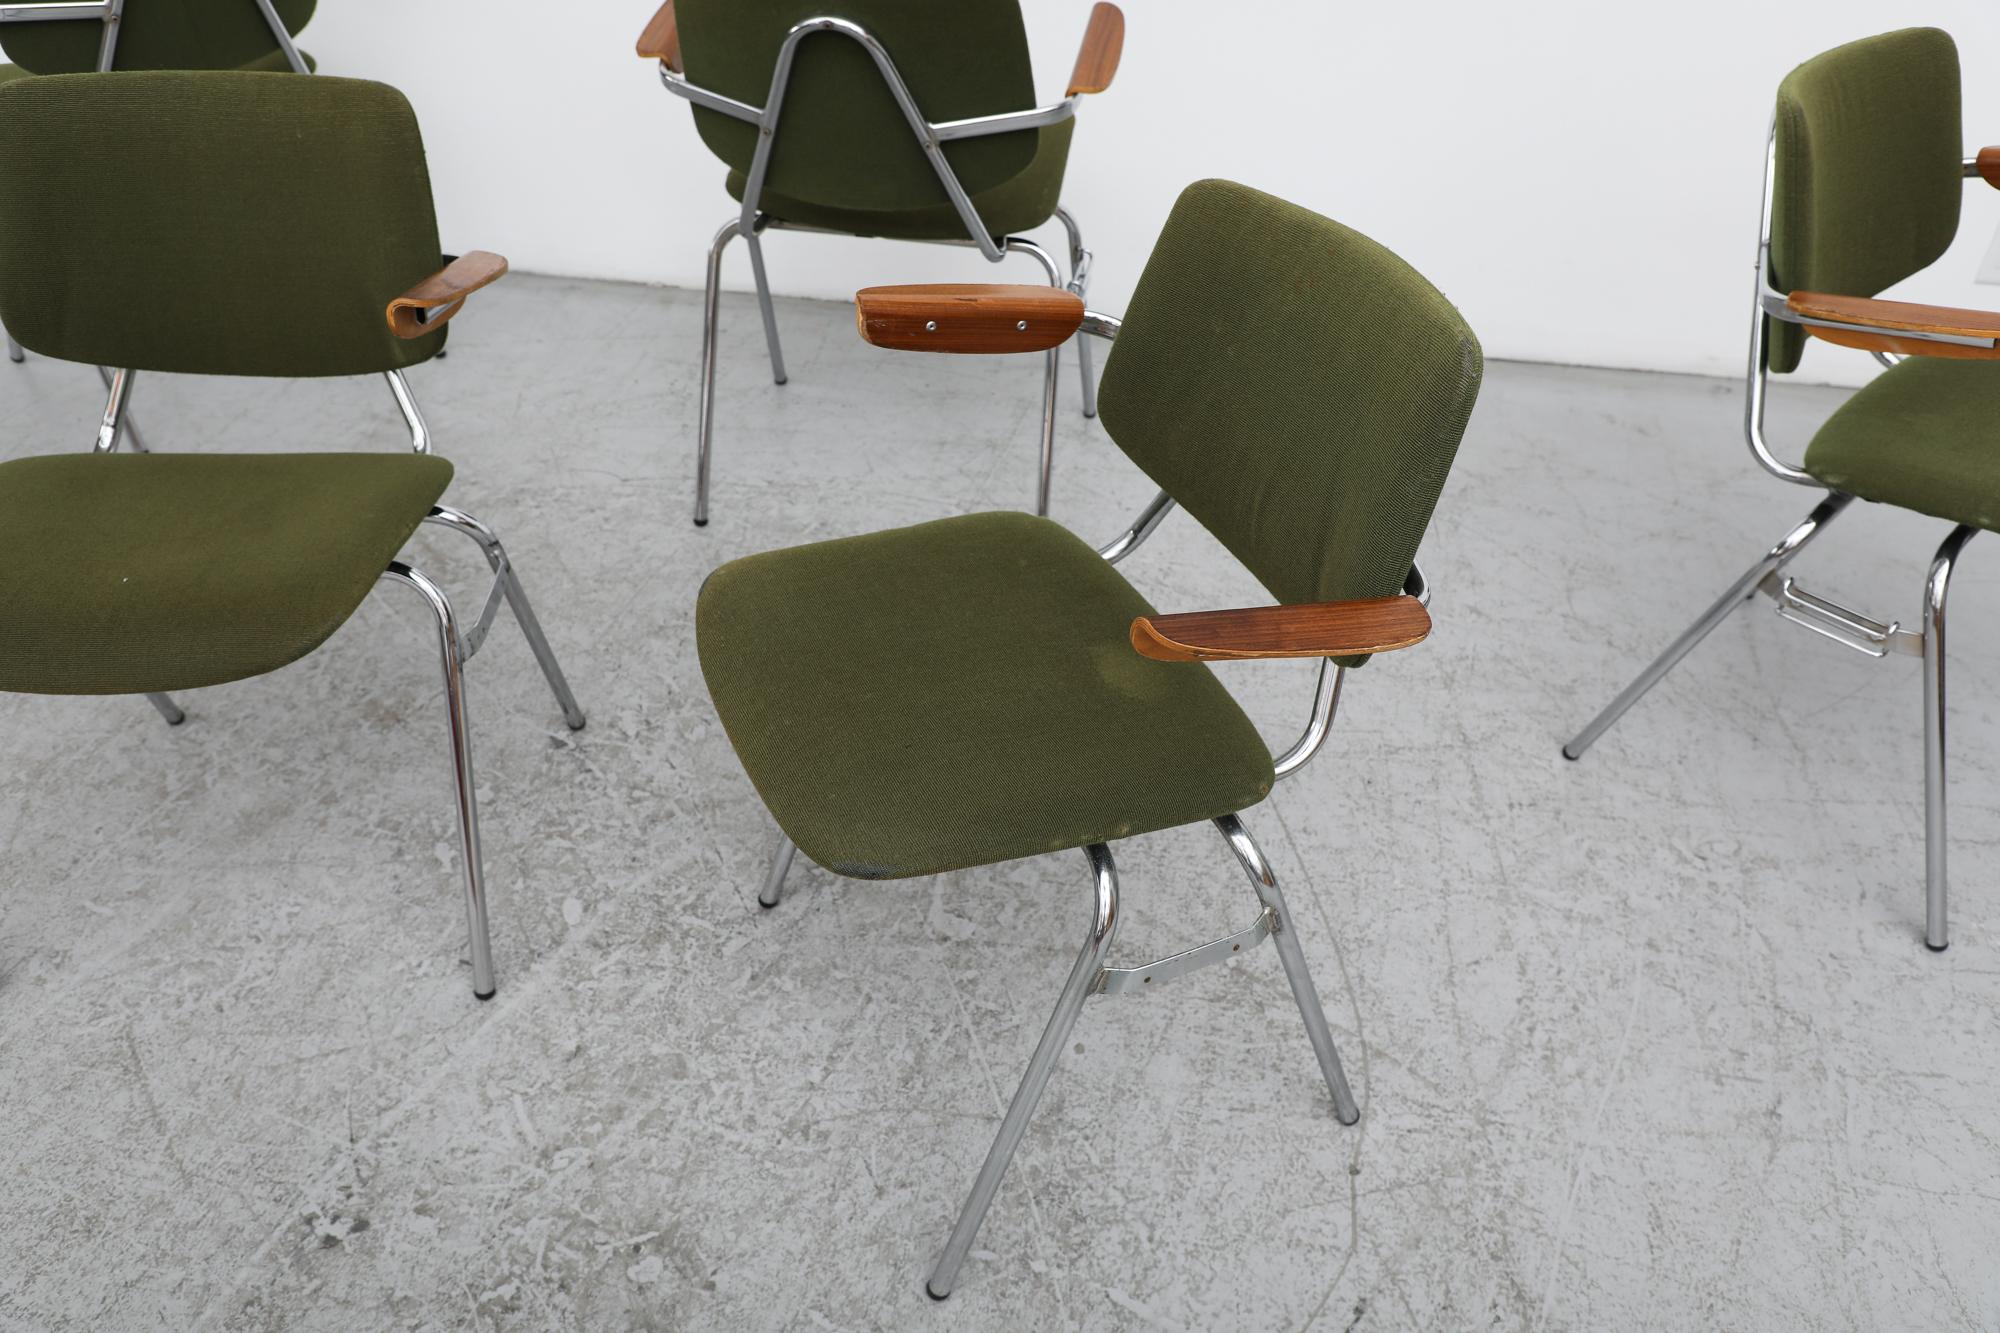 Néerlandais Kho Liang Ie 'Model 395 B/Z' Green Stacking Chairs with Armrests (Chaises empilables vertes avec accoudoirs) en vente